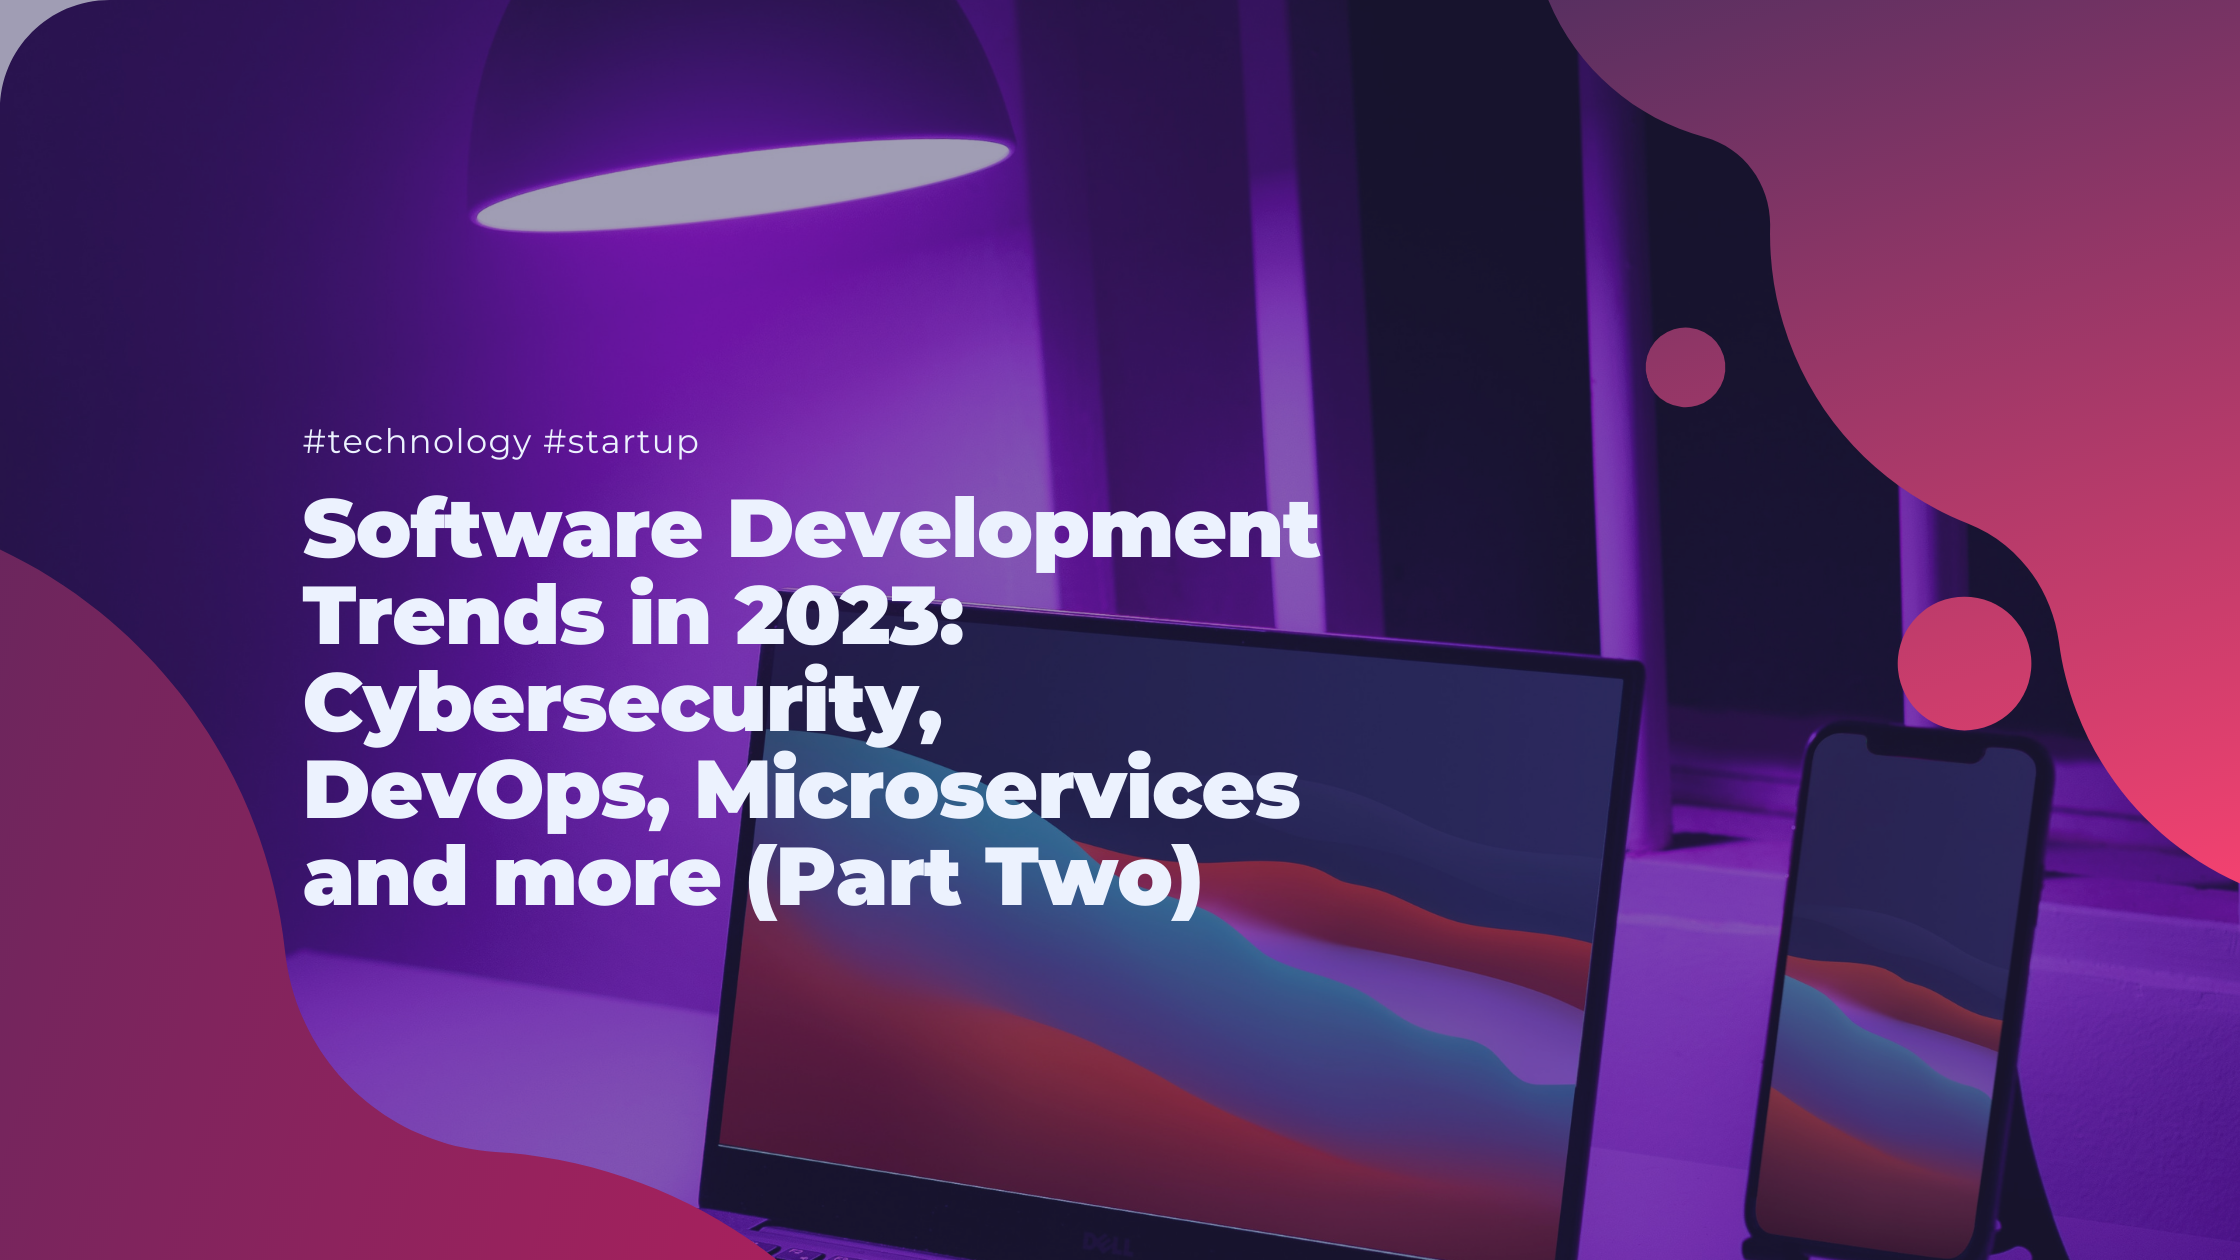 Software Development Trends in 2023: Cybersecurity, DevOps, Microservices and more (Part Two)